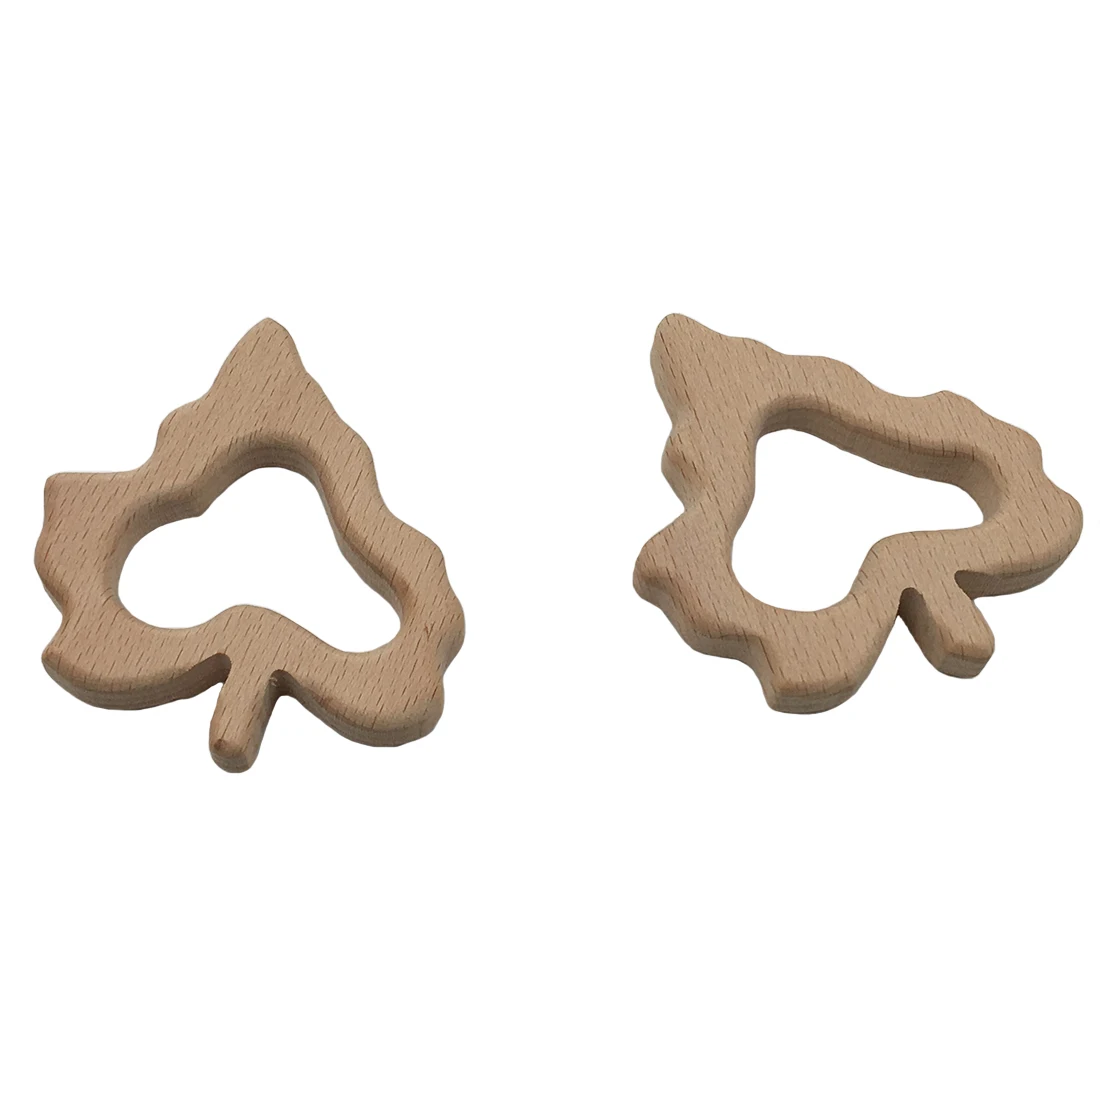 

Wholesale New Bpa Free Animal Organic Custom Food Grade Leaves Wooden Ring Silicone Teething Baby Teether Toys, Natural